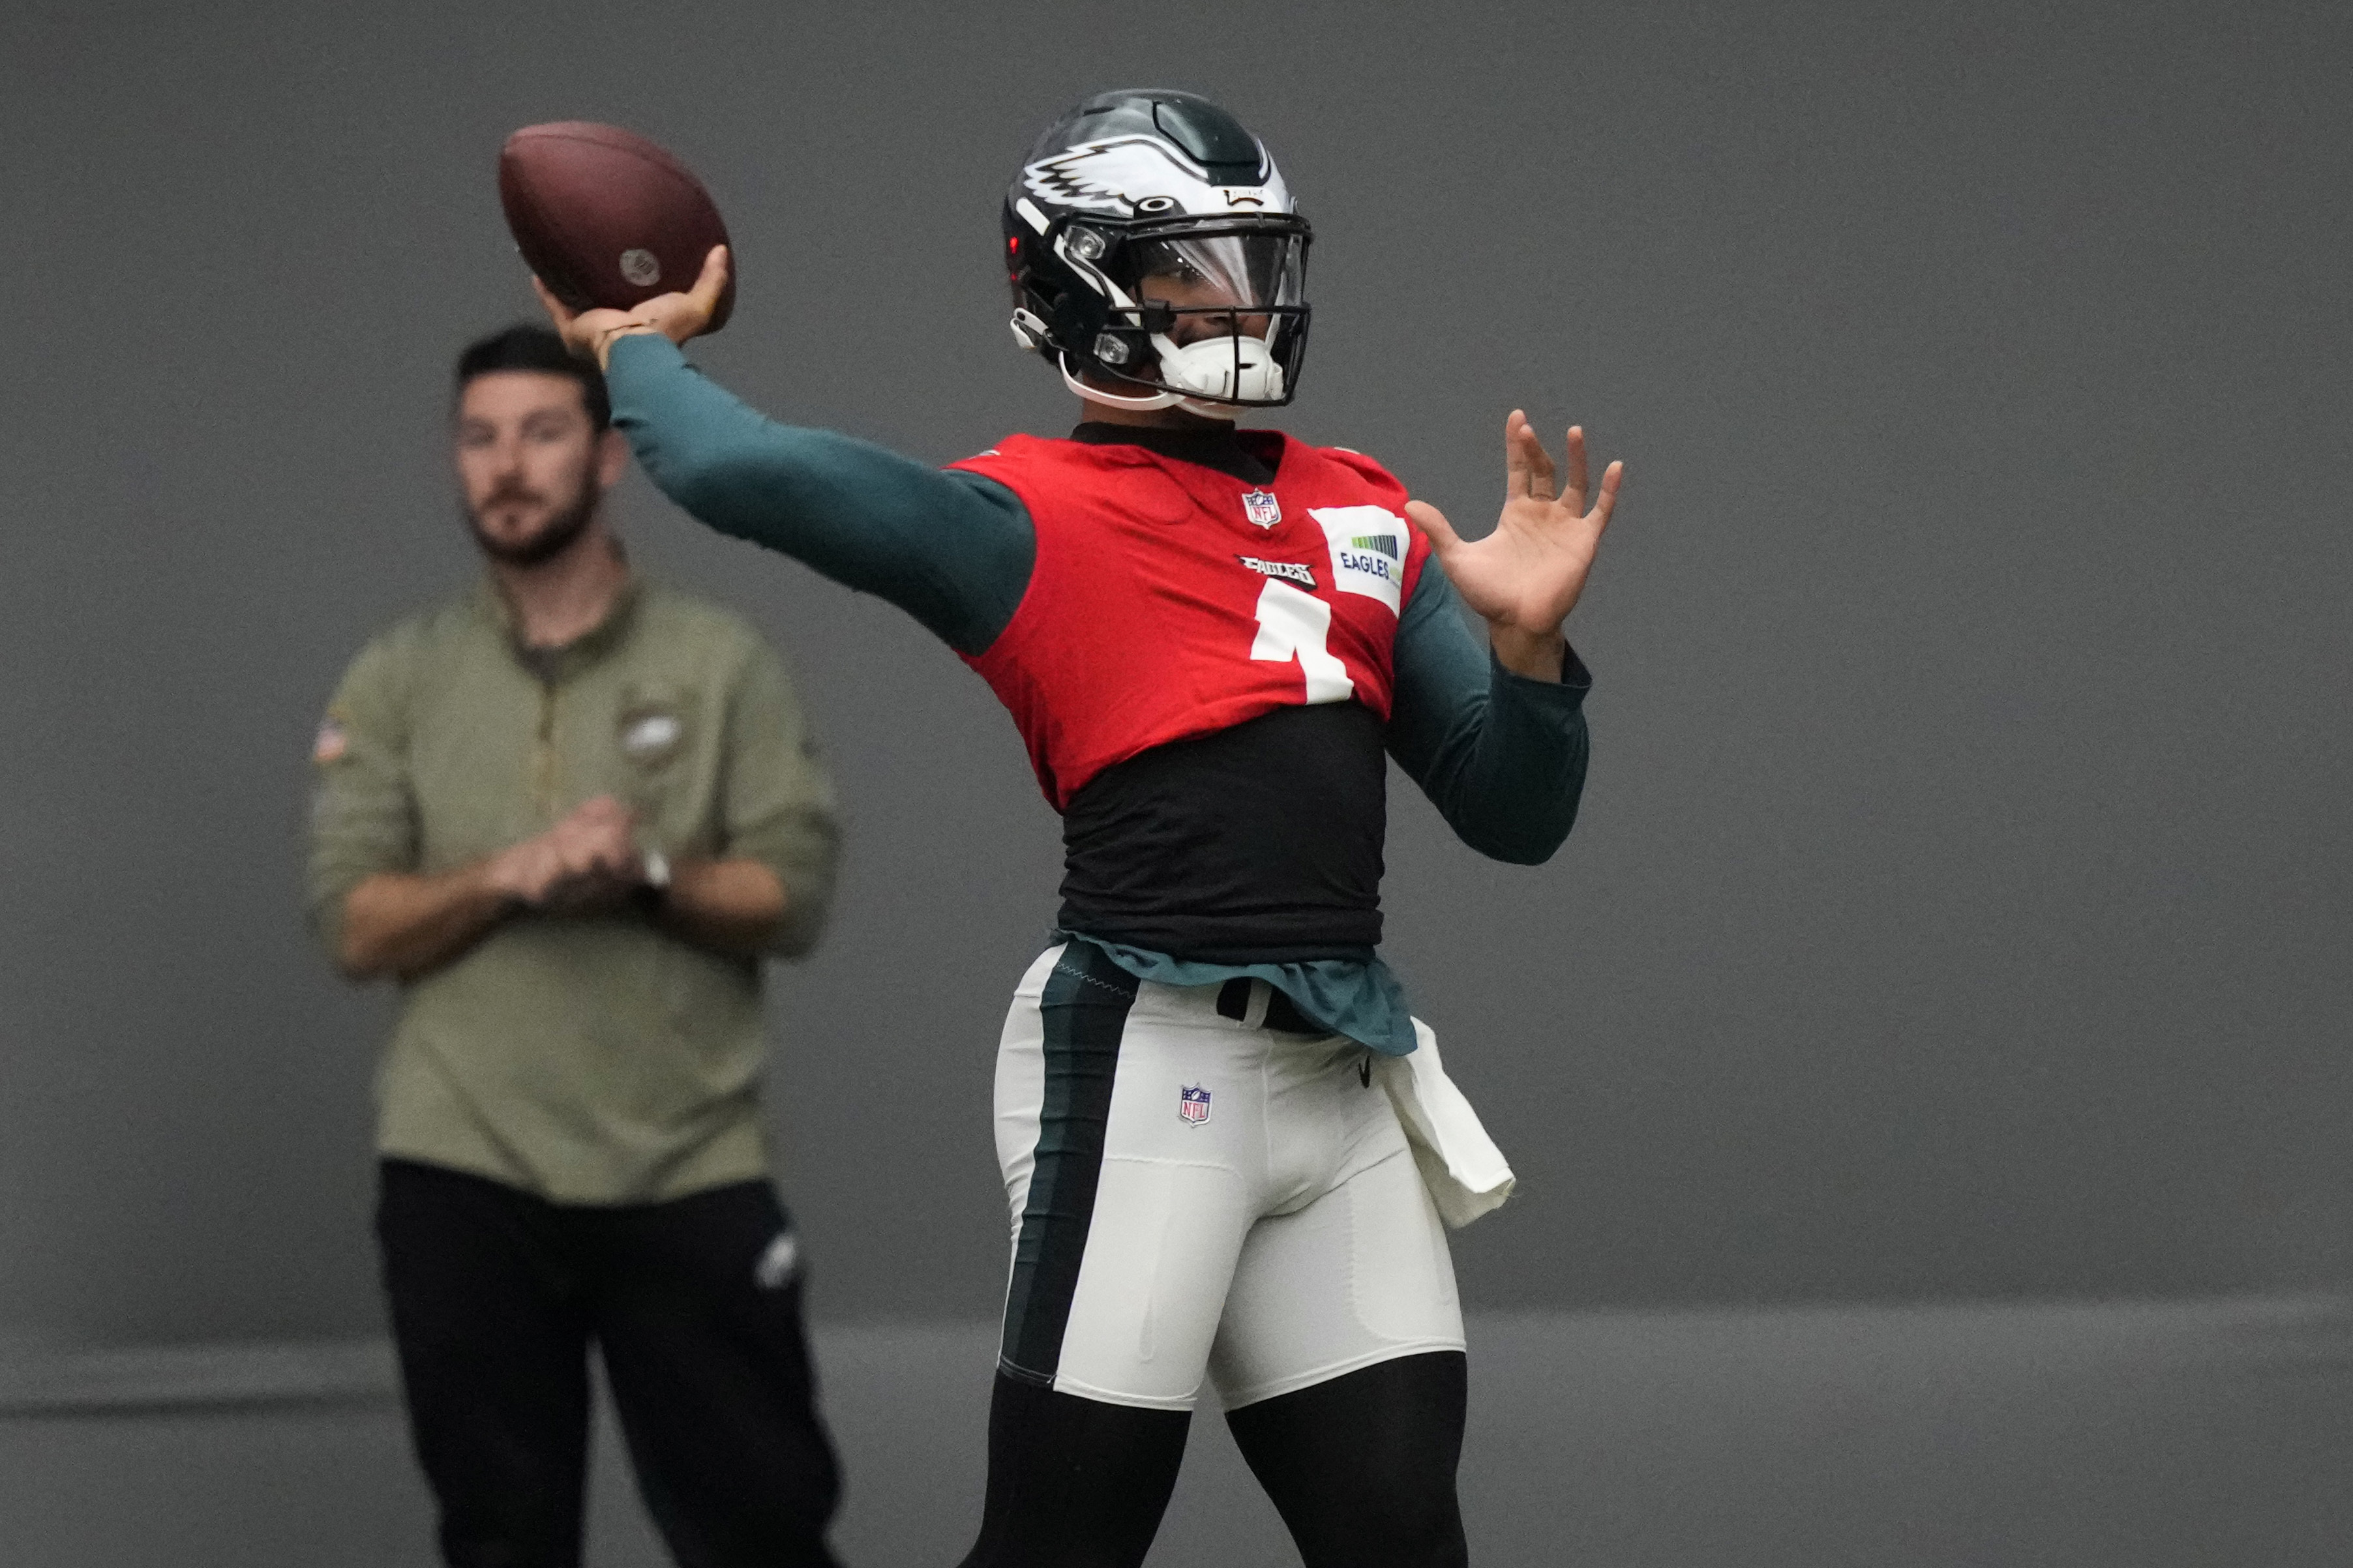 Super Bowl-bound Eagles are built around QB Jalen Hurts - WHYY